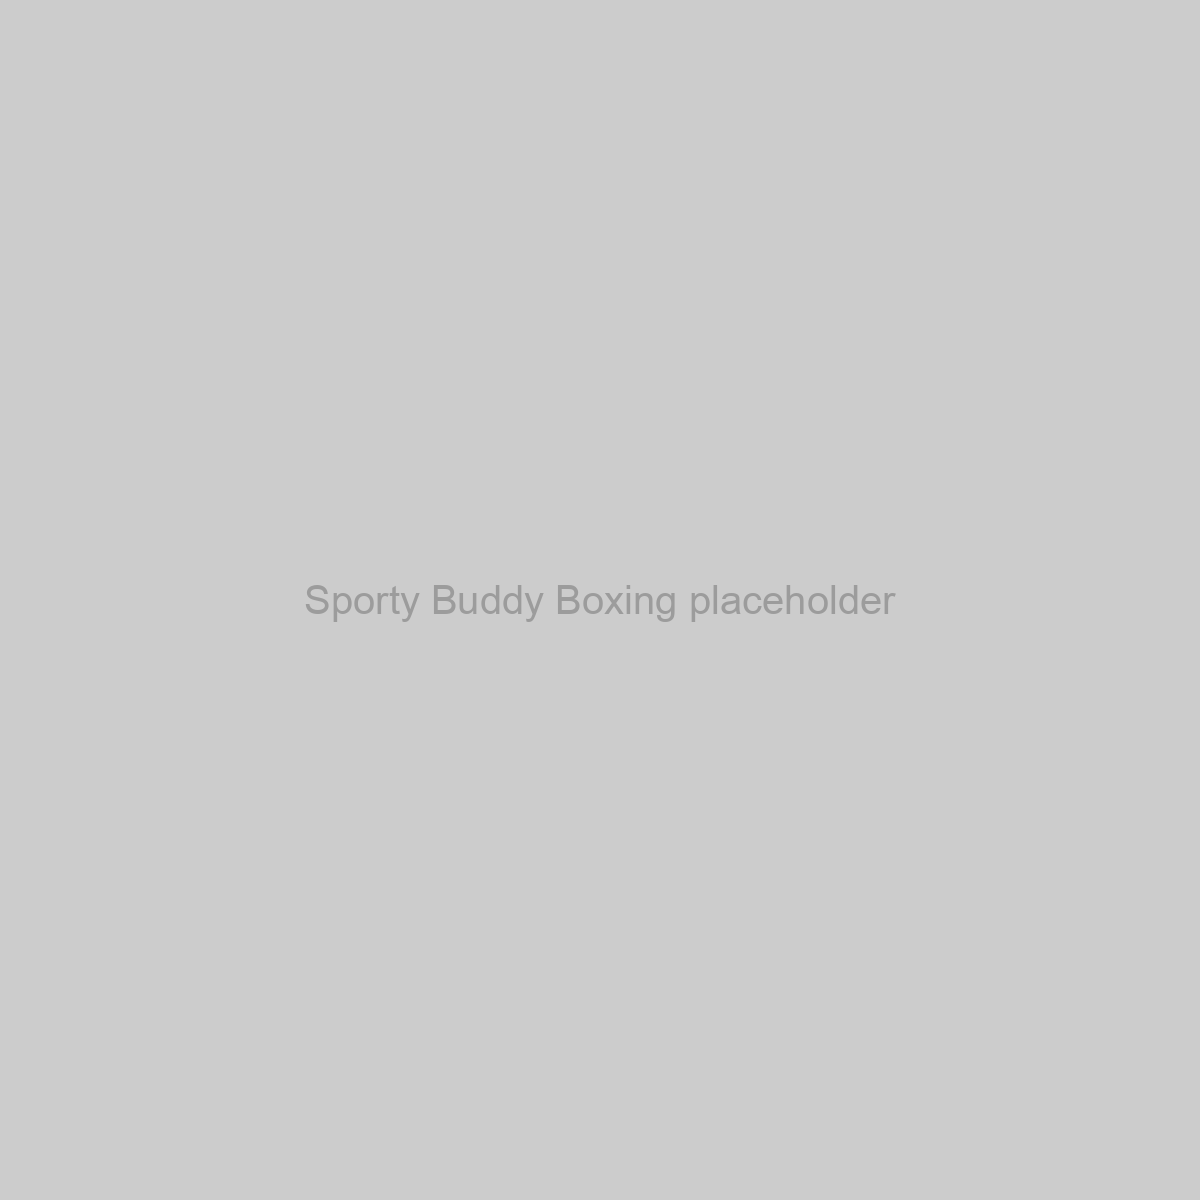 Sporty Buddy Boxing Placeholder Image